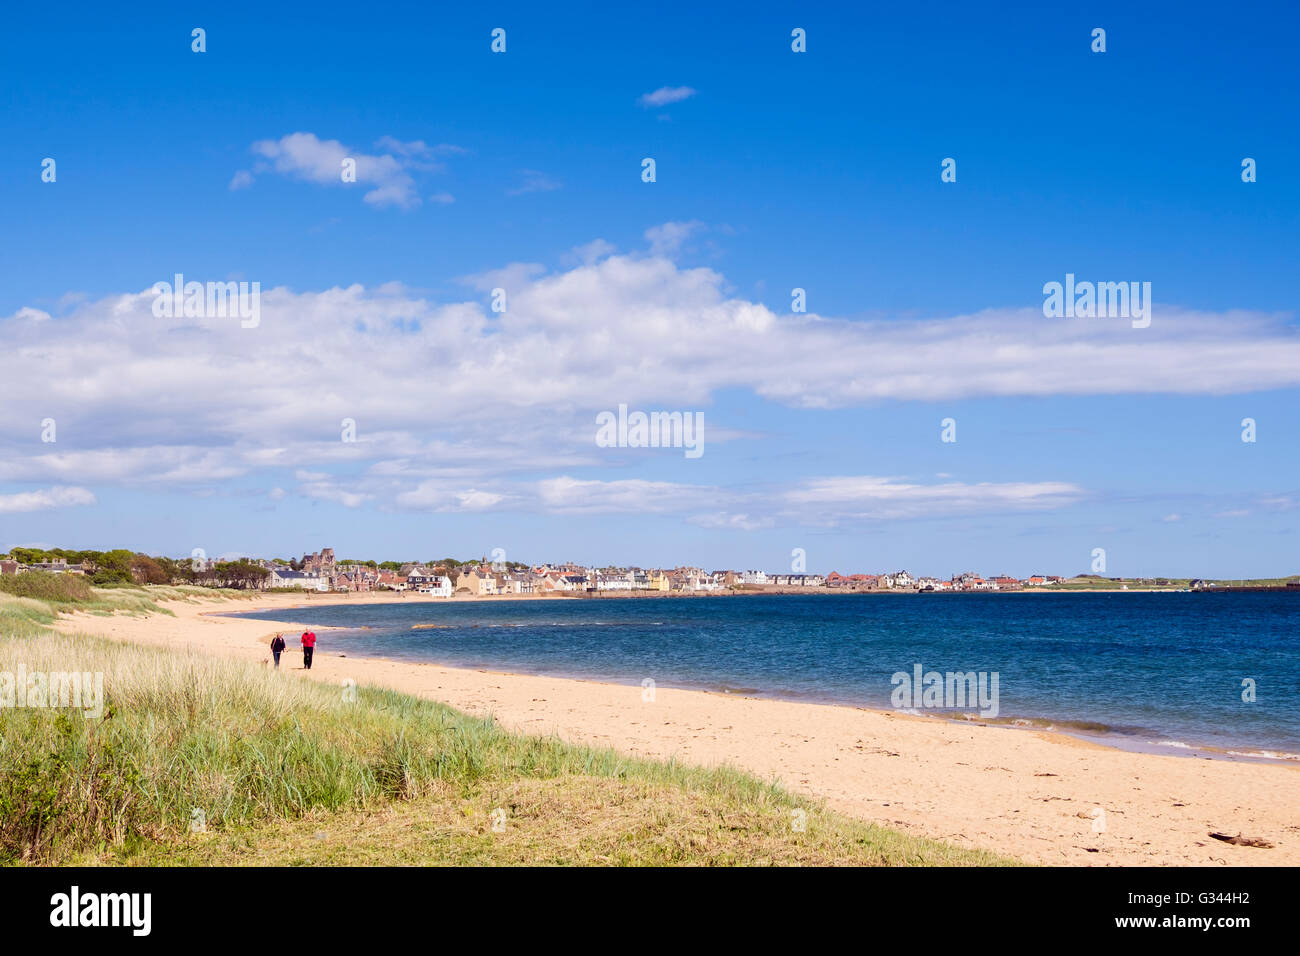 Two people walking on a quiet sandy beach in village on Firth of Forth coast. Elie and Earlsferry, East Neuk of Fife, Fife Scotland, UK Stock Photo